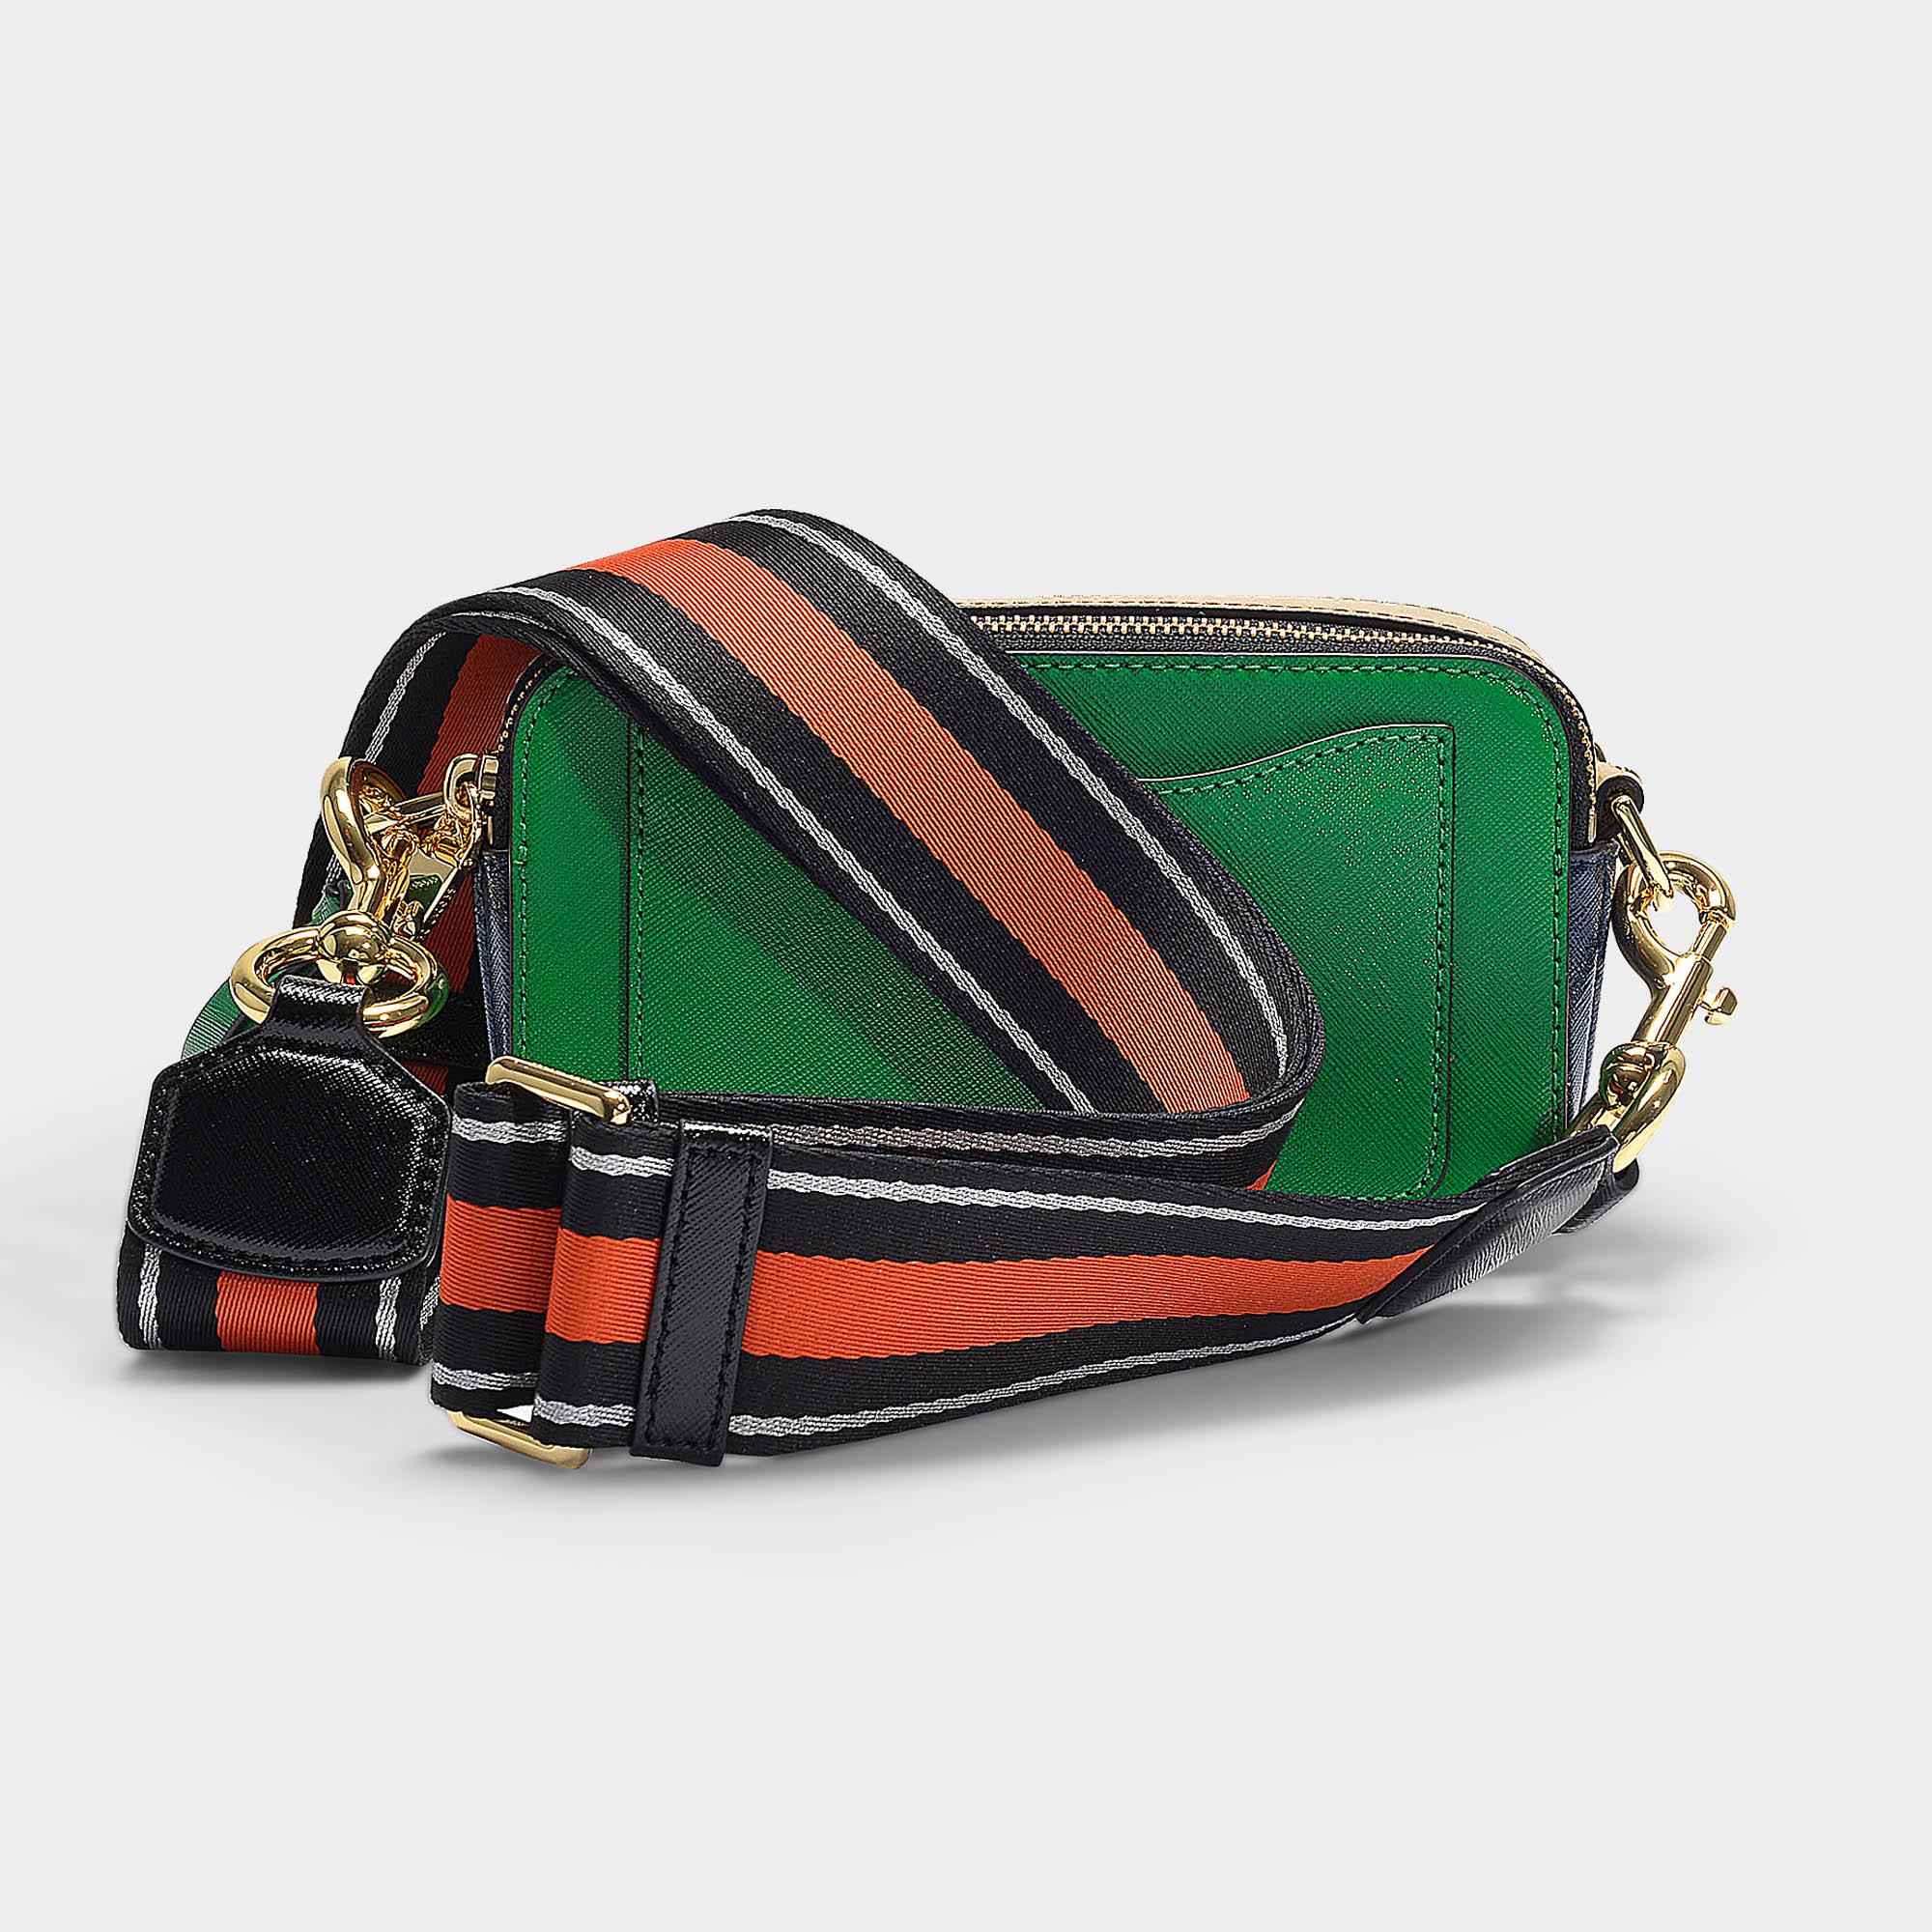 Marc Jacobs The Snapshot Dtm Anodized Camera Bag in Green